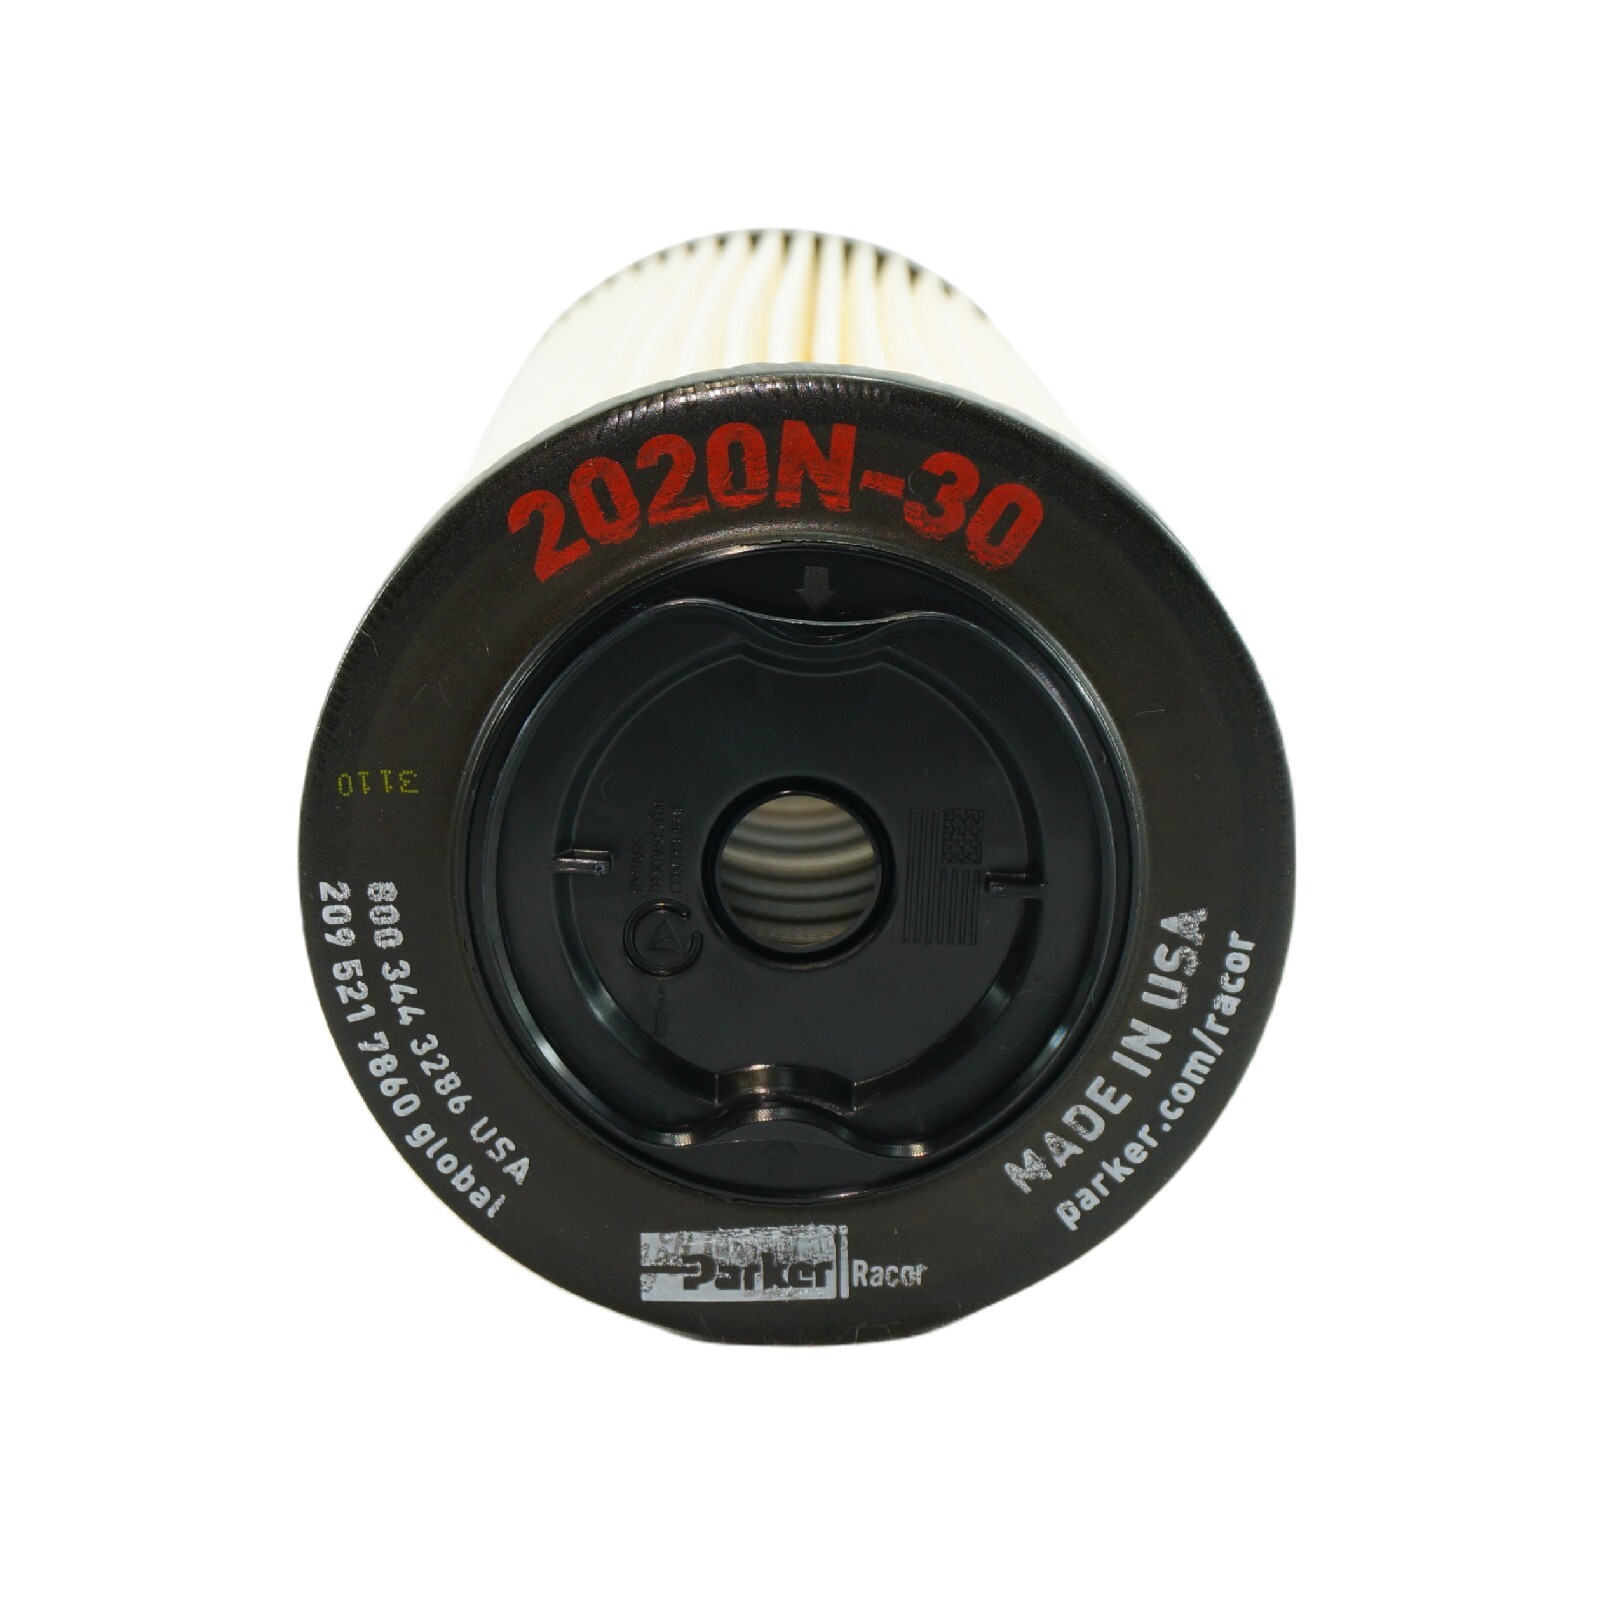 Genuine Racor 2020 Series 30-Micron, 2020N-30 / 2020PM-OR, Suits 1000MA & 1000FH